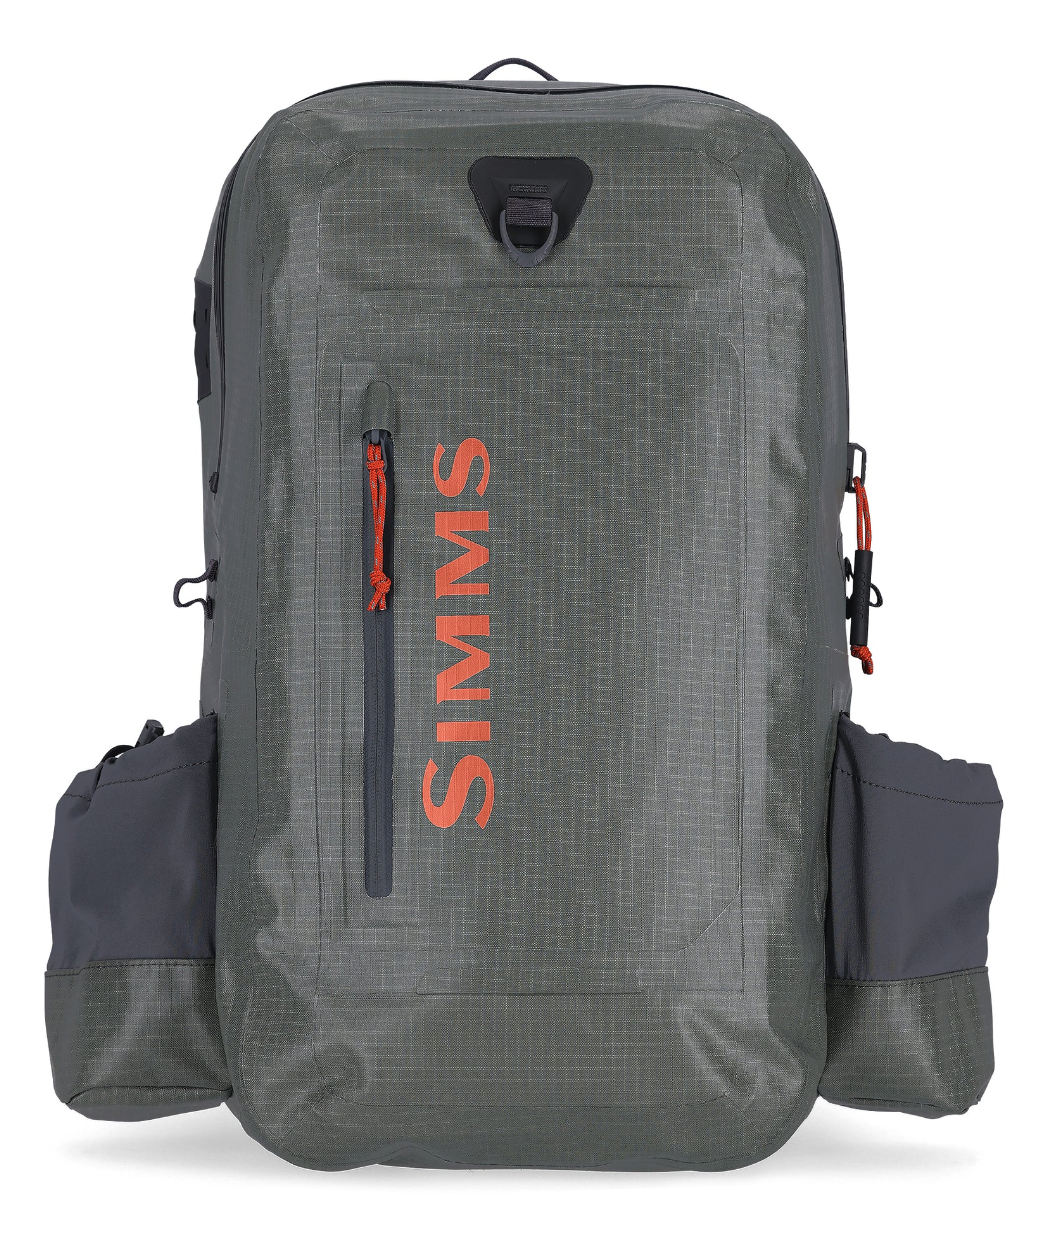 Buy  Simms Dry Creek Z Backpack online for a submersible waterproof fly fishing backpack.